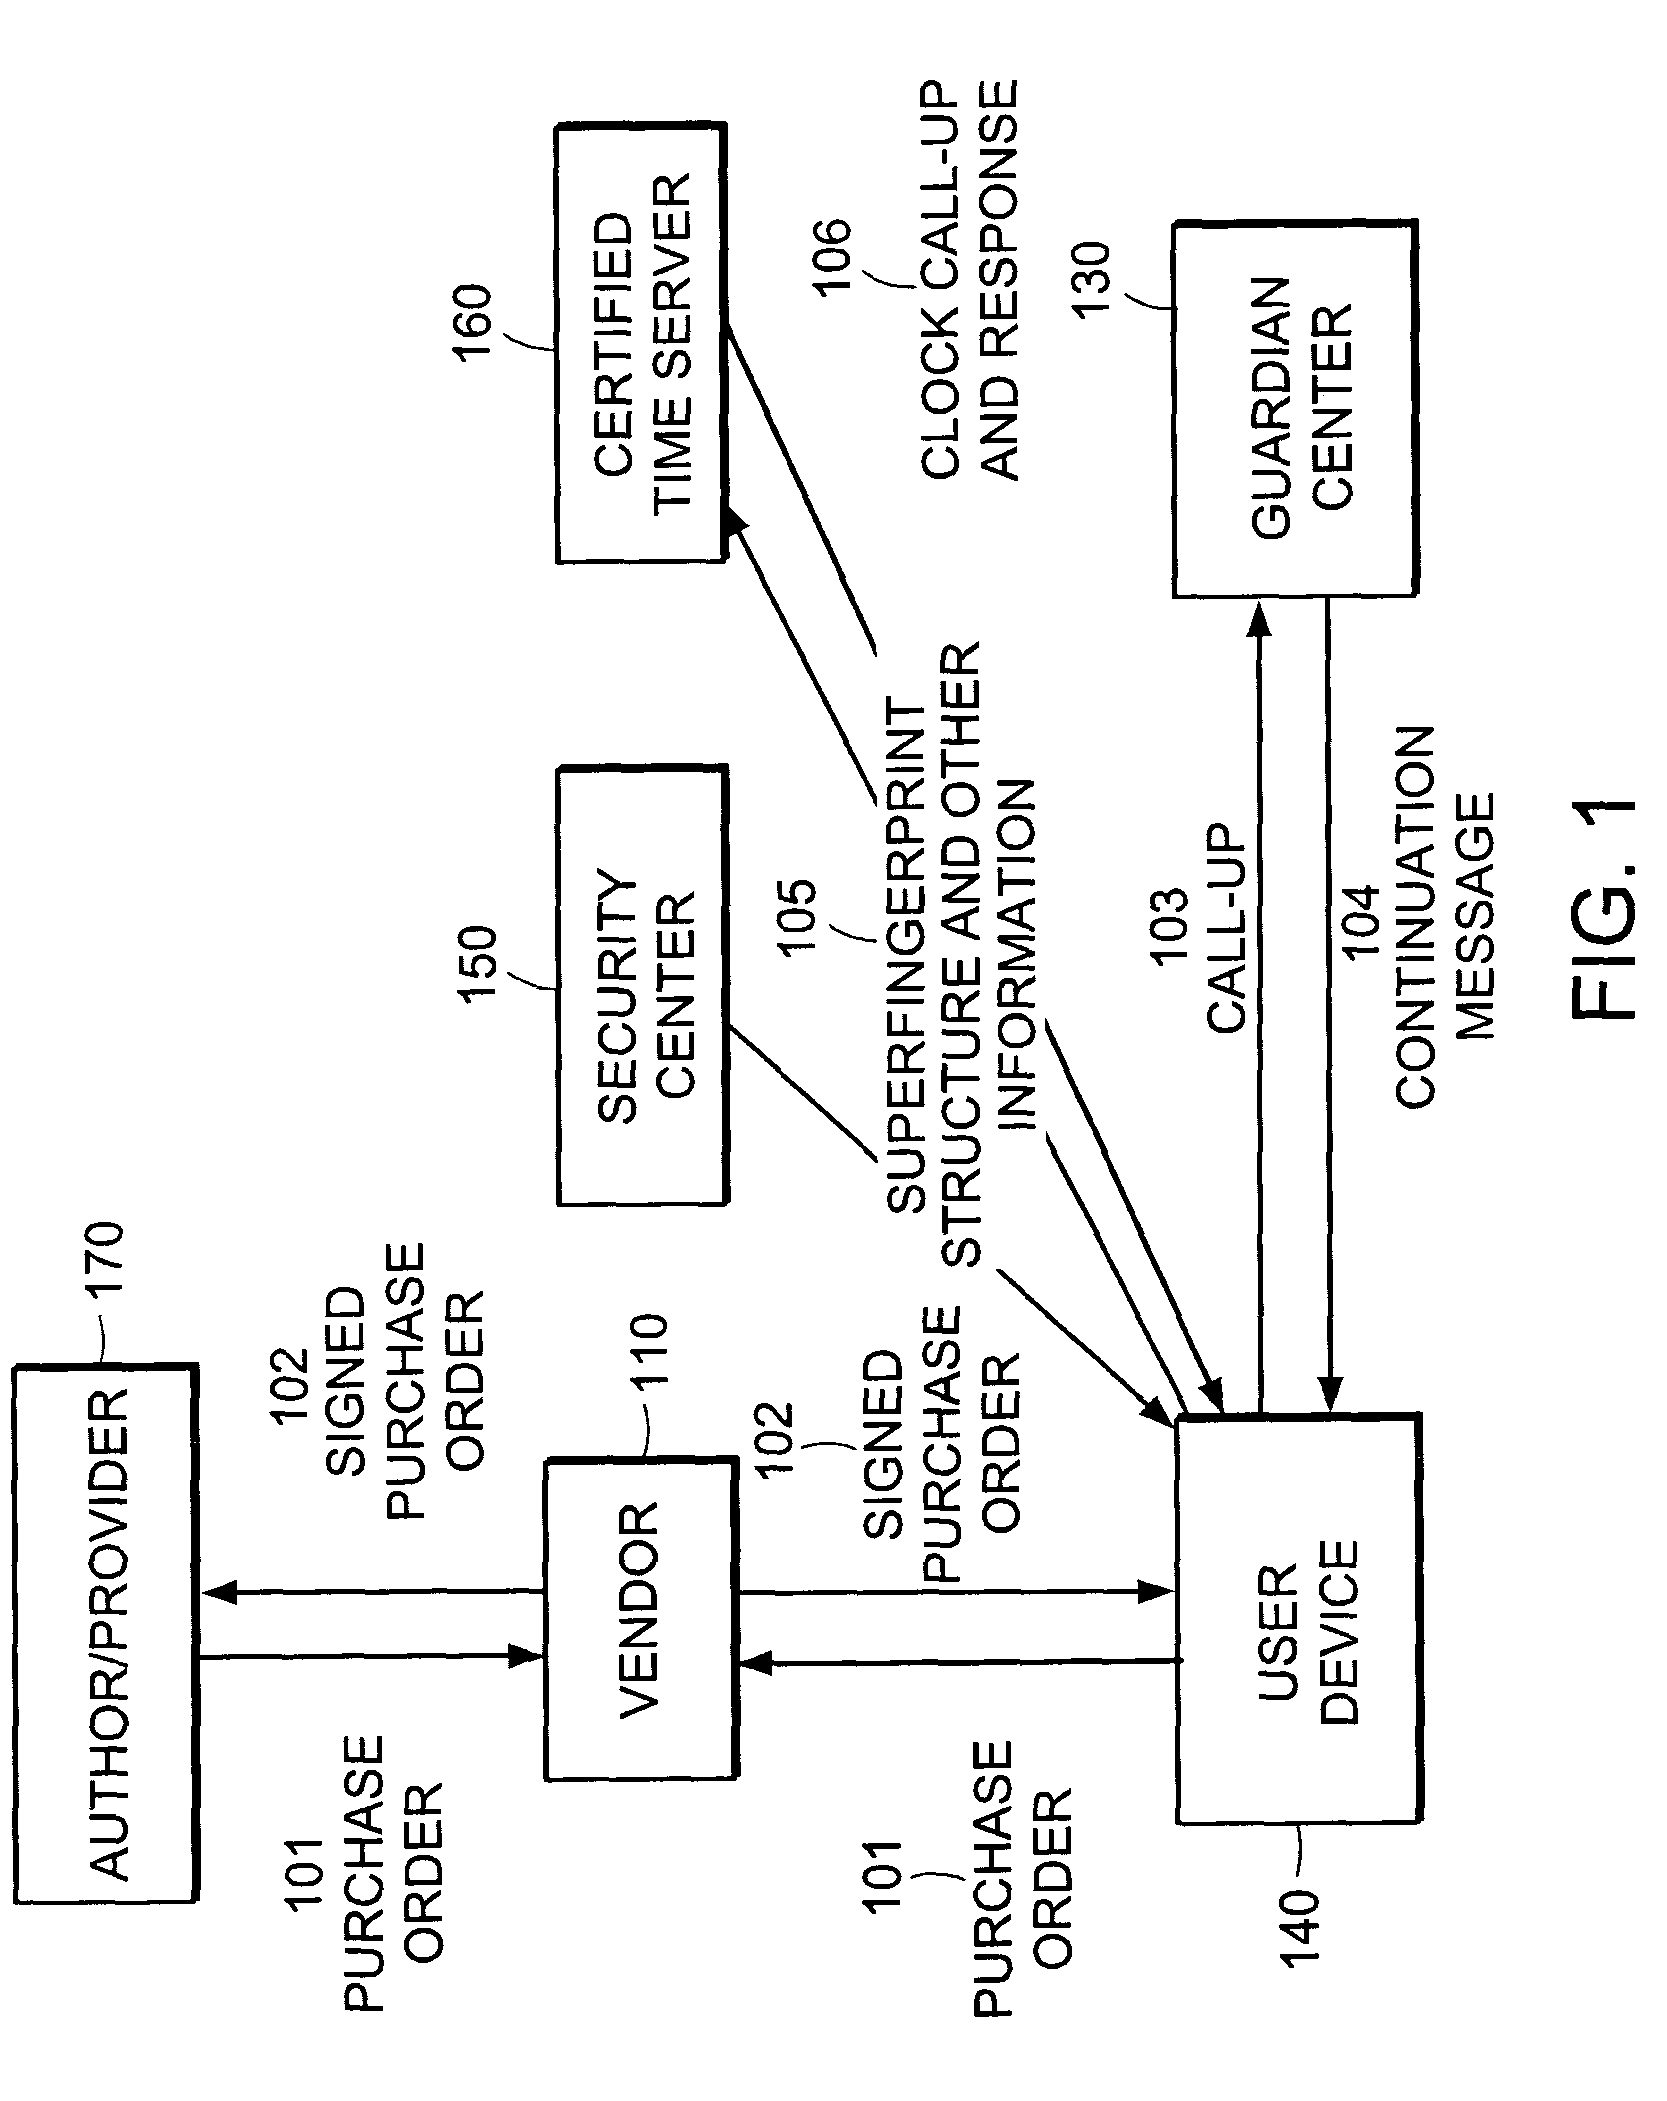 Method and apparatus for protecting information and privacy